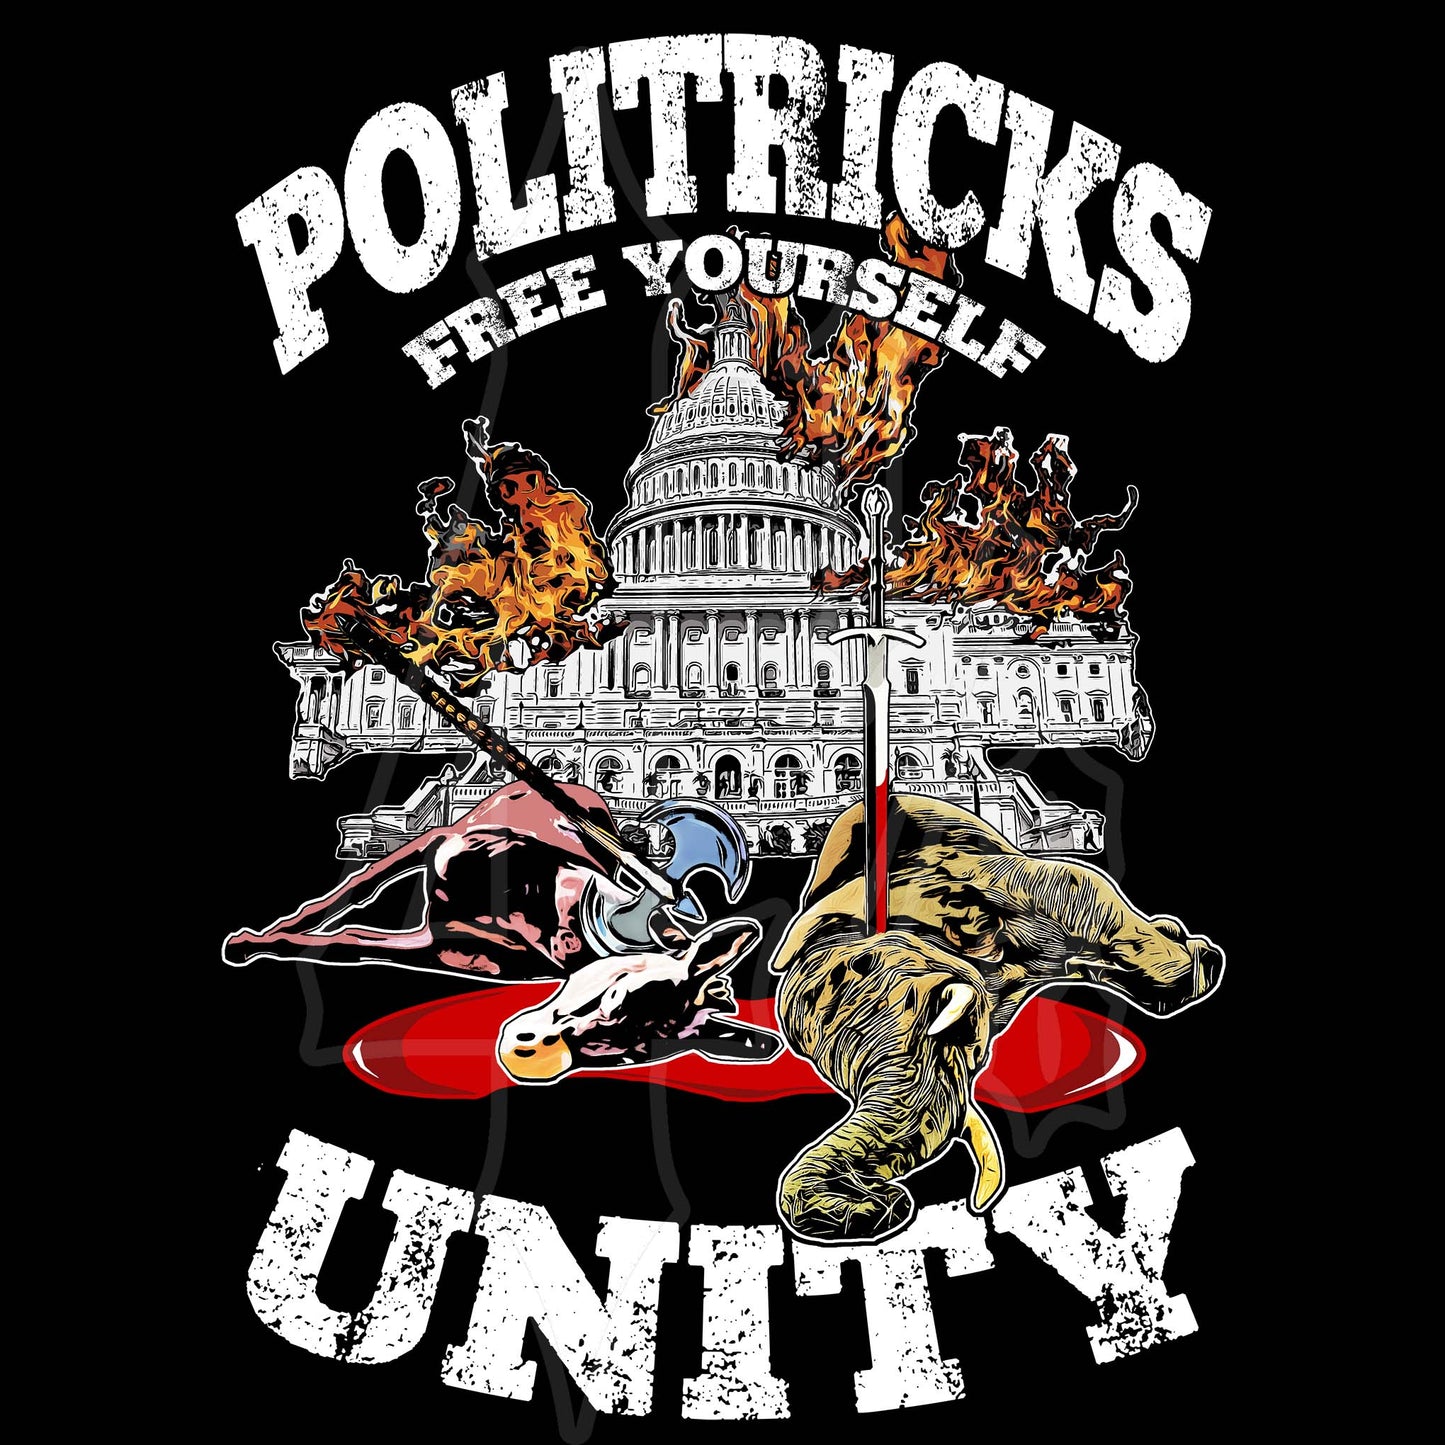 Menace Clothing Co Politricks graphic, donkey with axe in neck, elephant with sword in neck, in a pool of blood in front of US Capital building on fire. Words saying Politricks, Free Yourself, Unity.